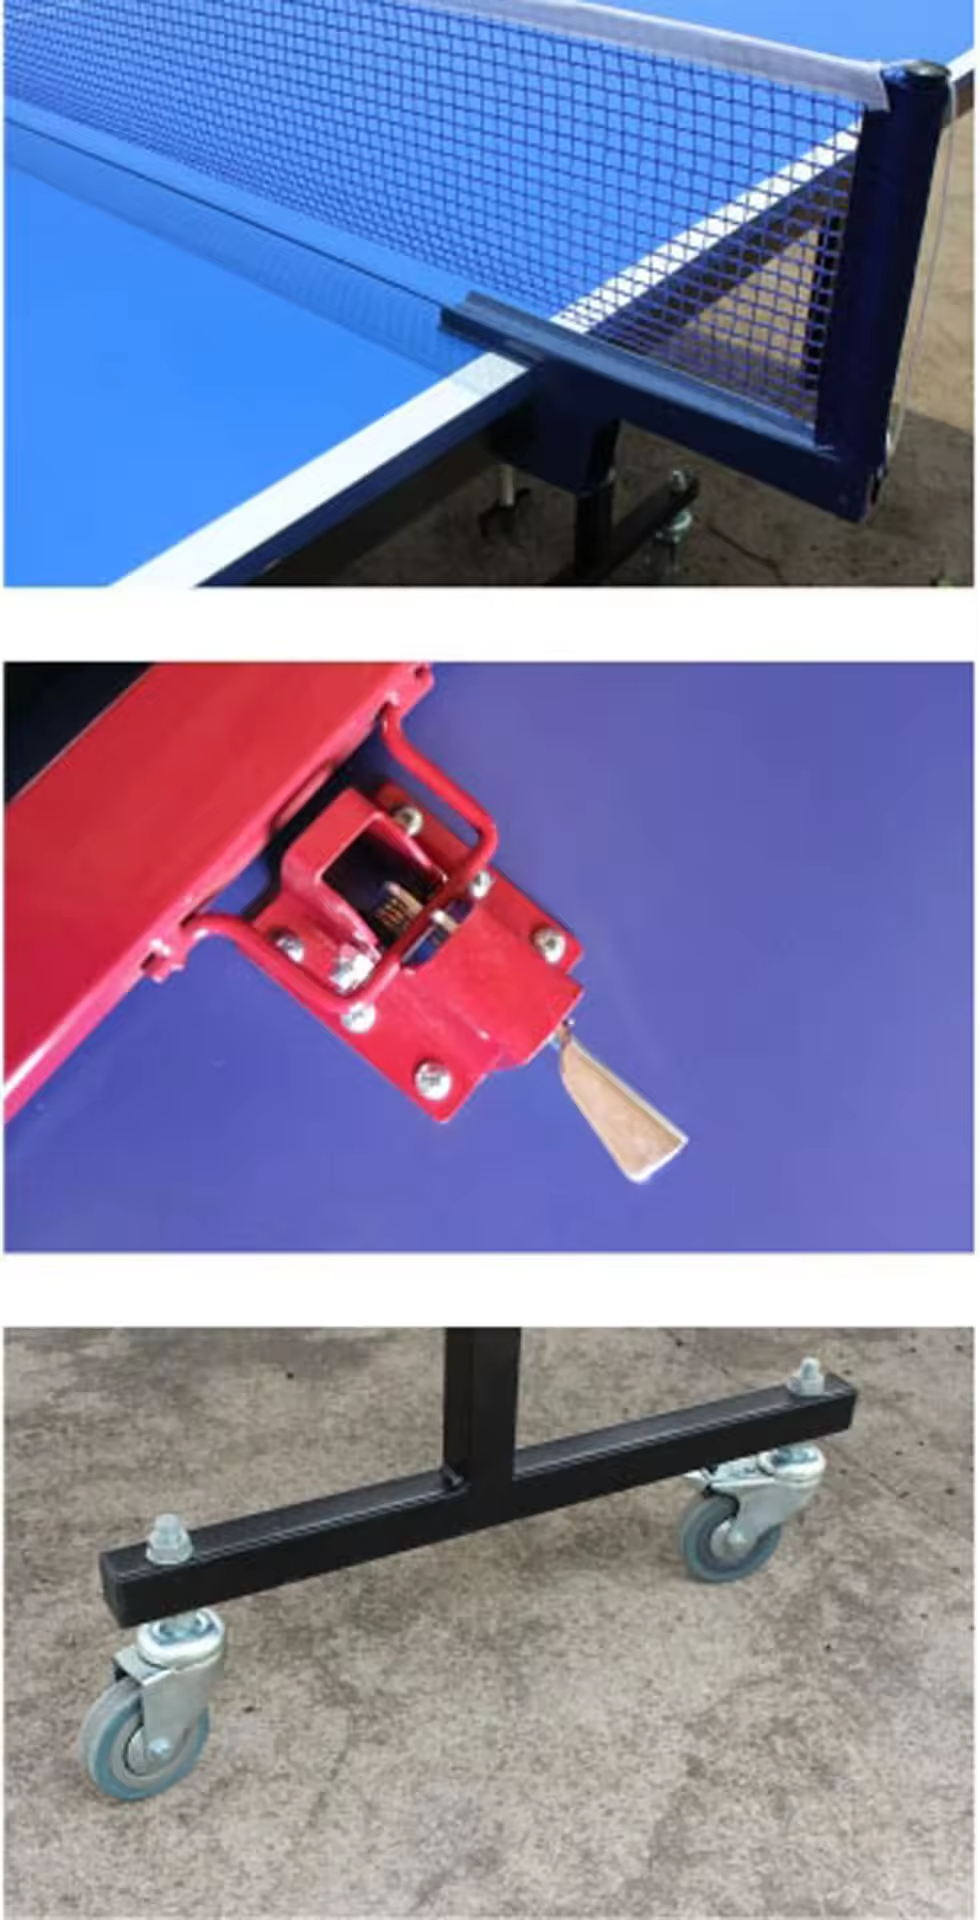 Professional Outdoor Indoor Table Tennis Table Movable Table With Wheels Eco-Friendly Anti-Corrosion Anti-UV Waterproof Features